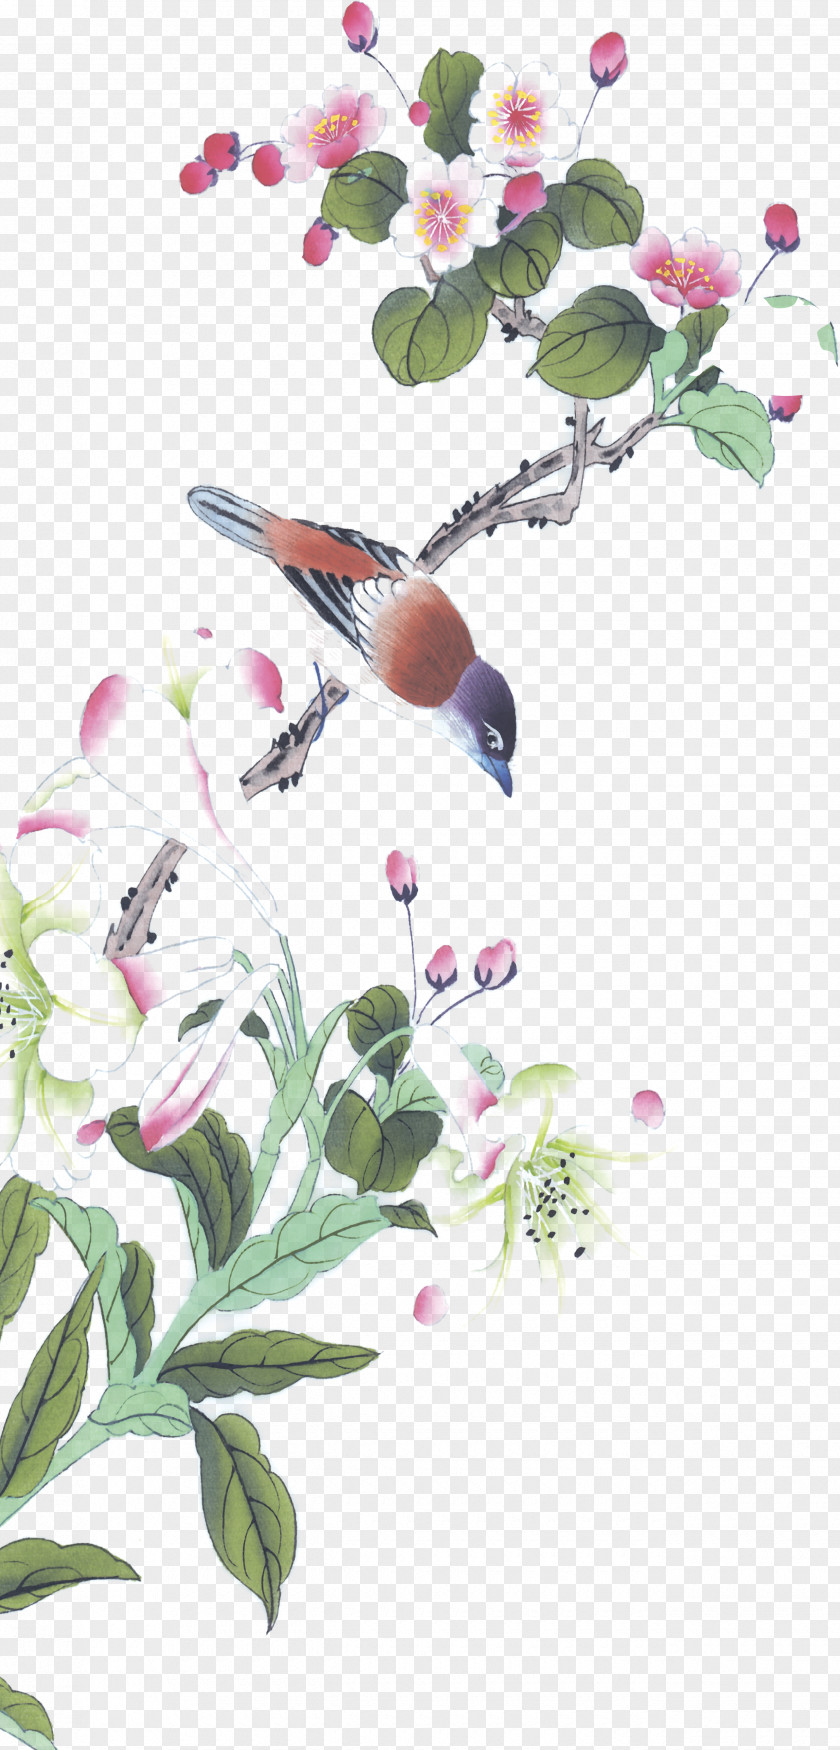 Branches Vector Calligraphy Image Chinese Painting Bird-and-flower PNG